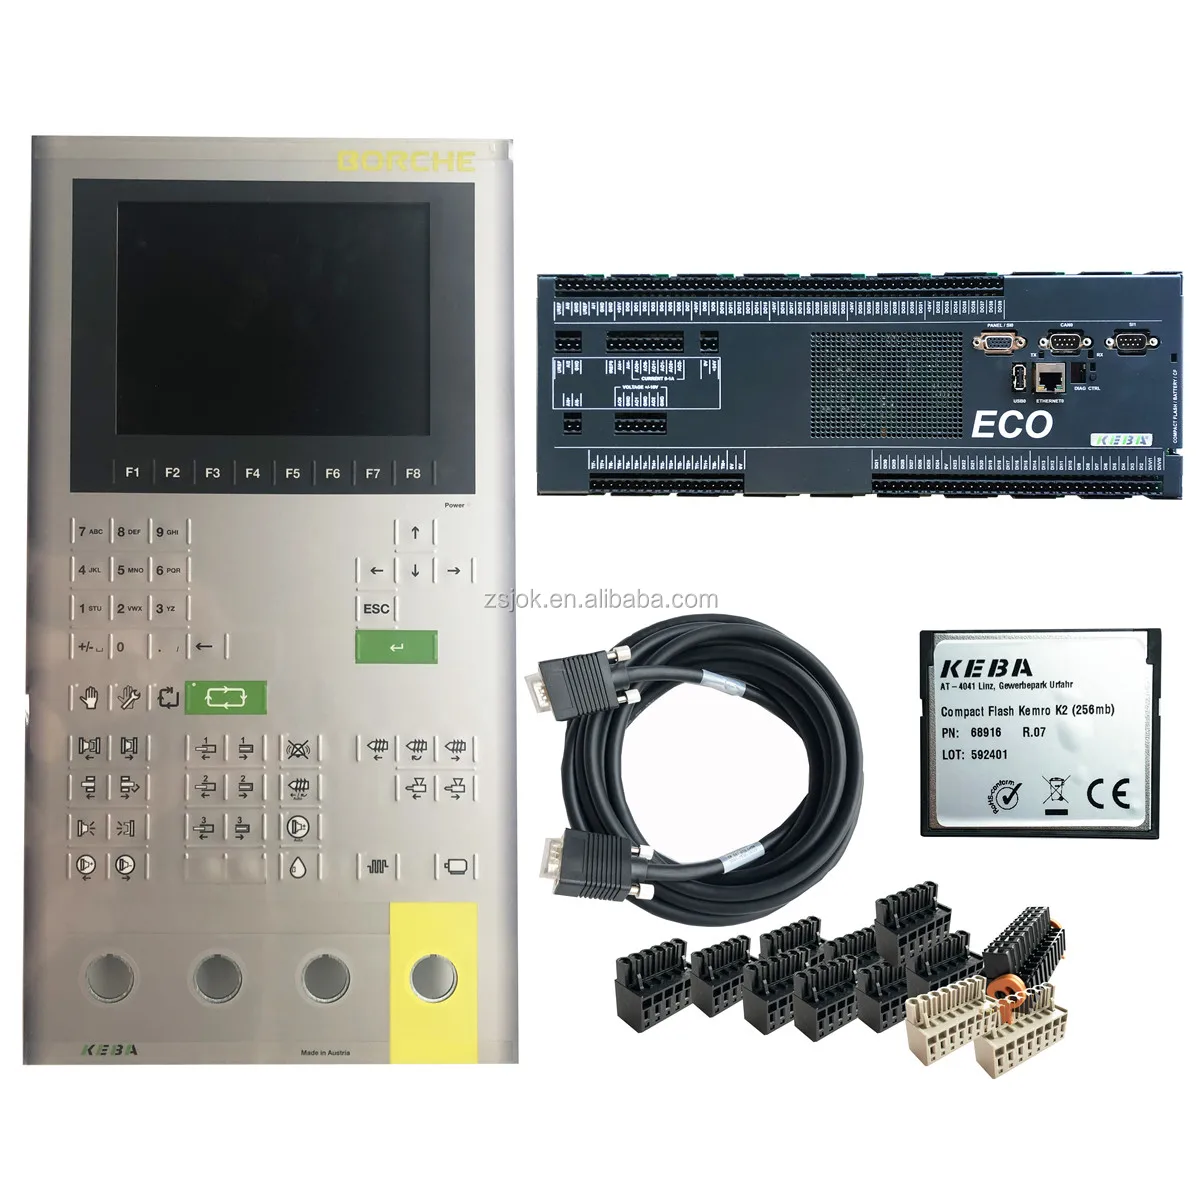 Keba Cp031 T With Op 331 P 6400 Panel Full Set Control System Plc For Injection Molding Machine Keba K2 0 Buy Keba Cp031 T Keba Control System Keba Op 331 P 6400 Product On Alibaba Com